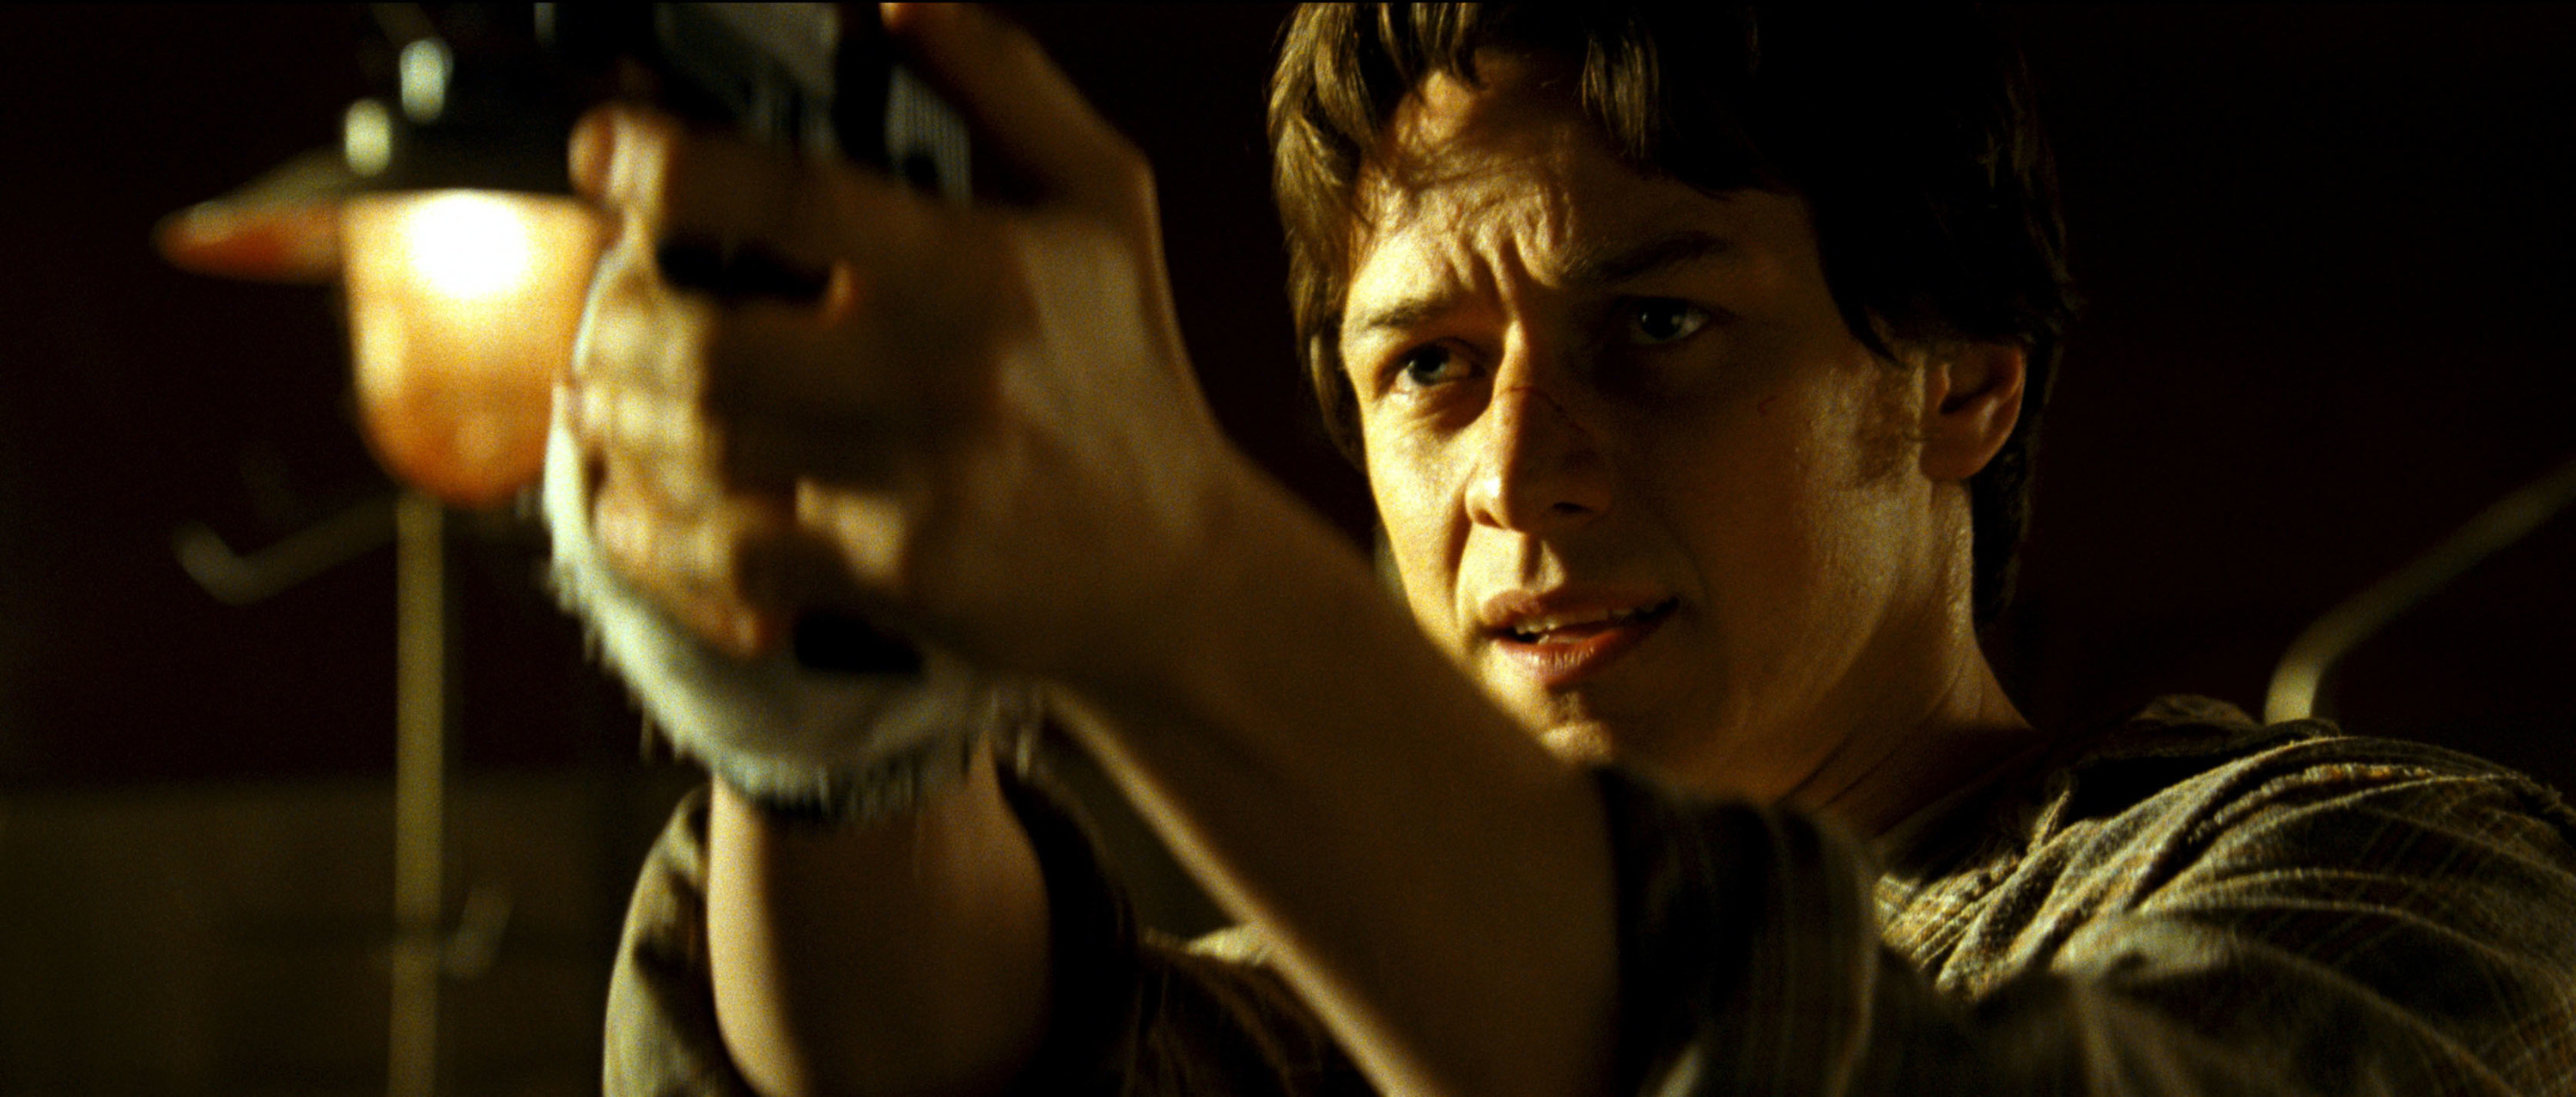 James McAvoy takes aim in &quot;Wanted&quot;